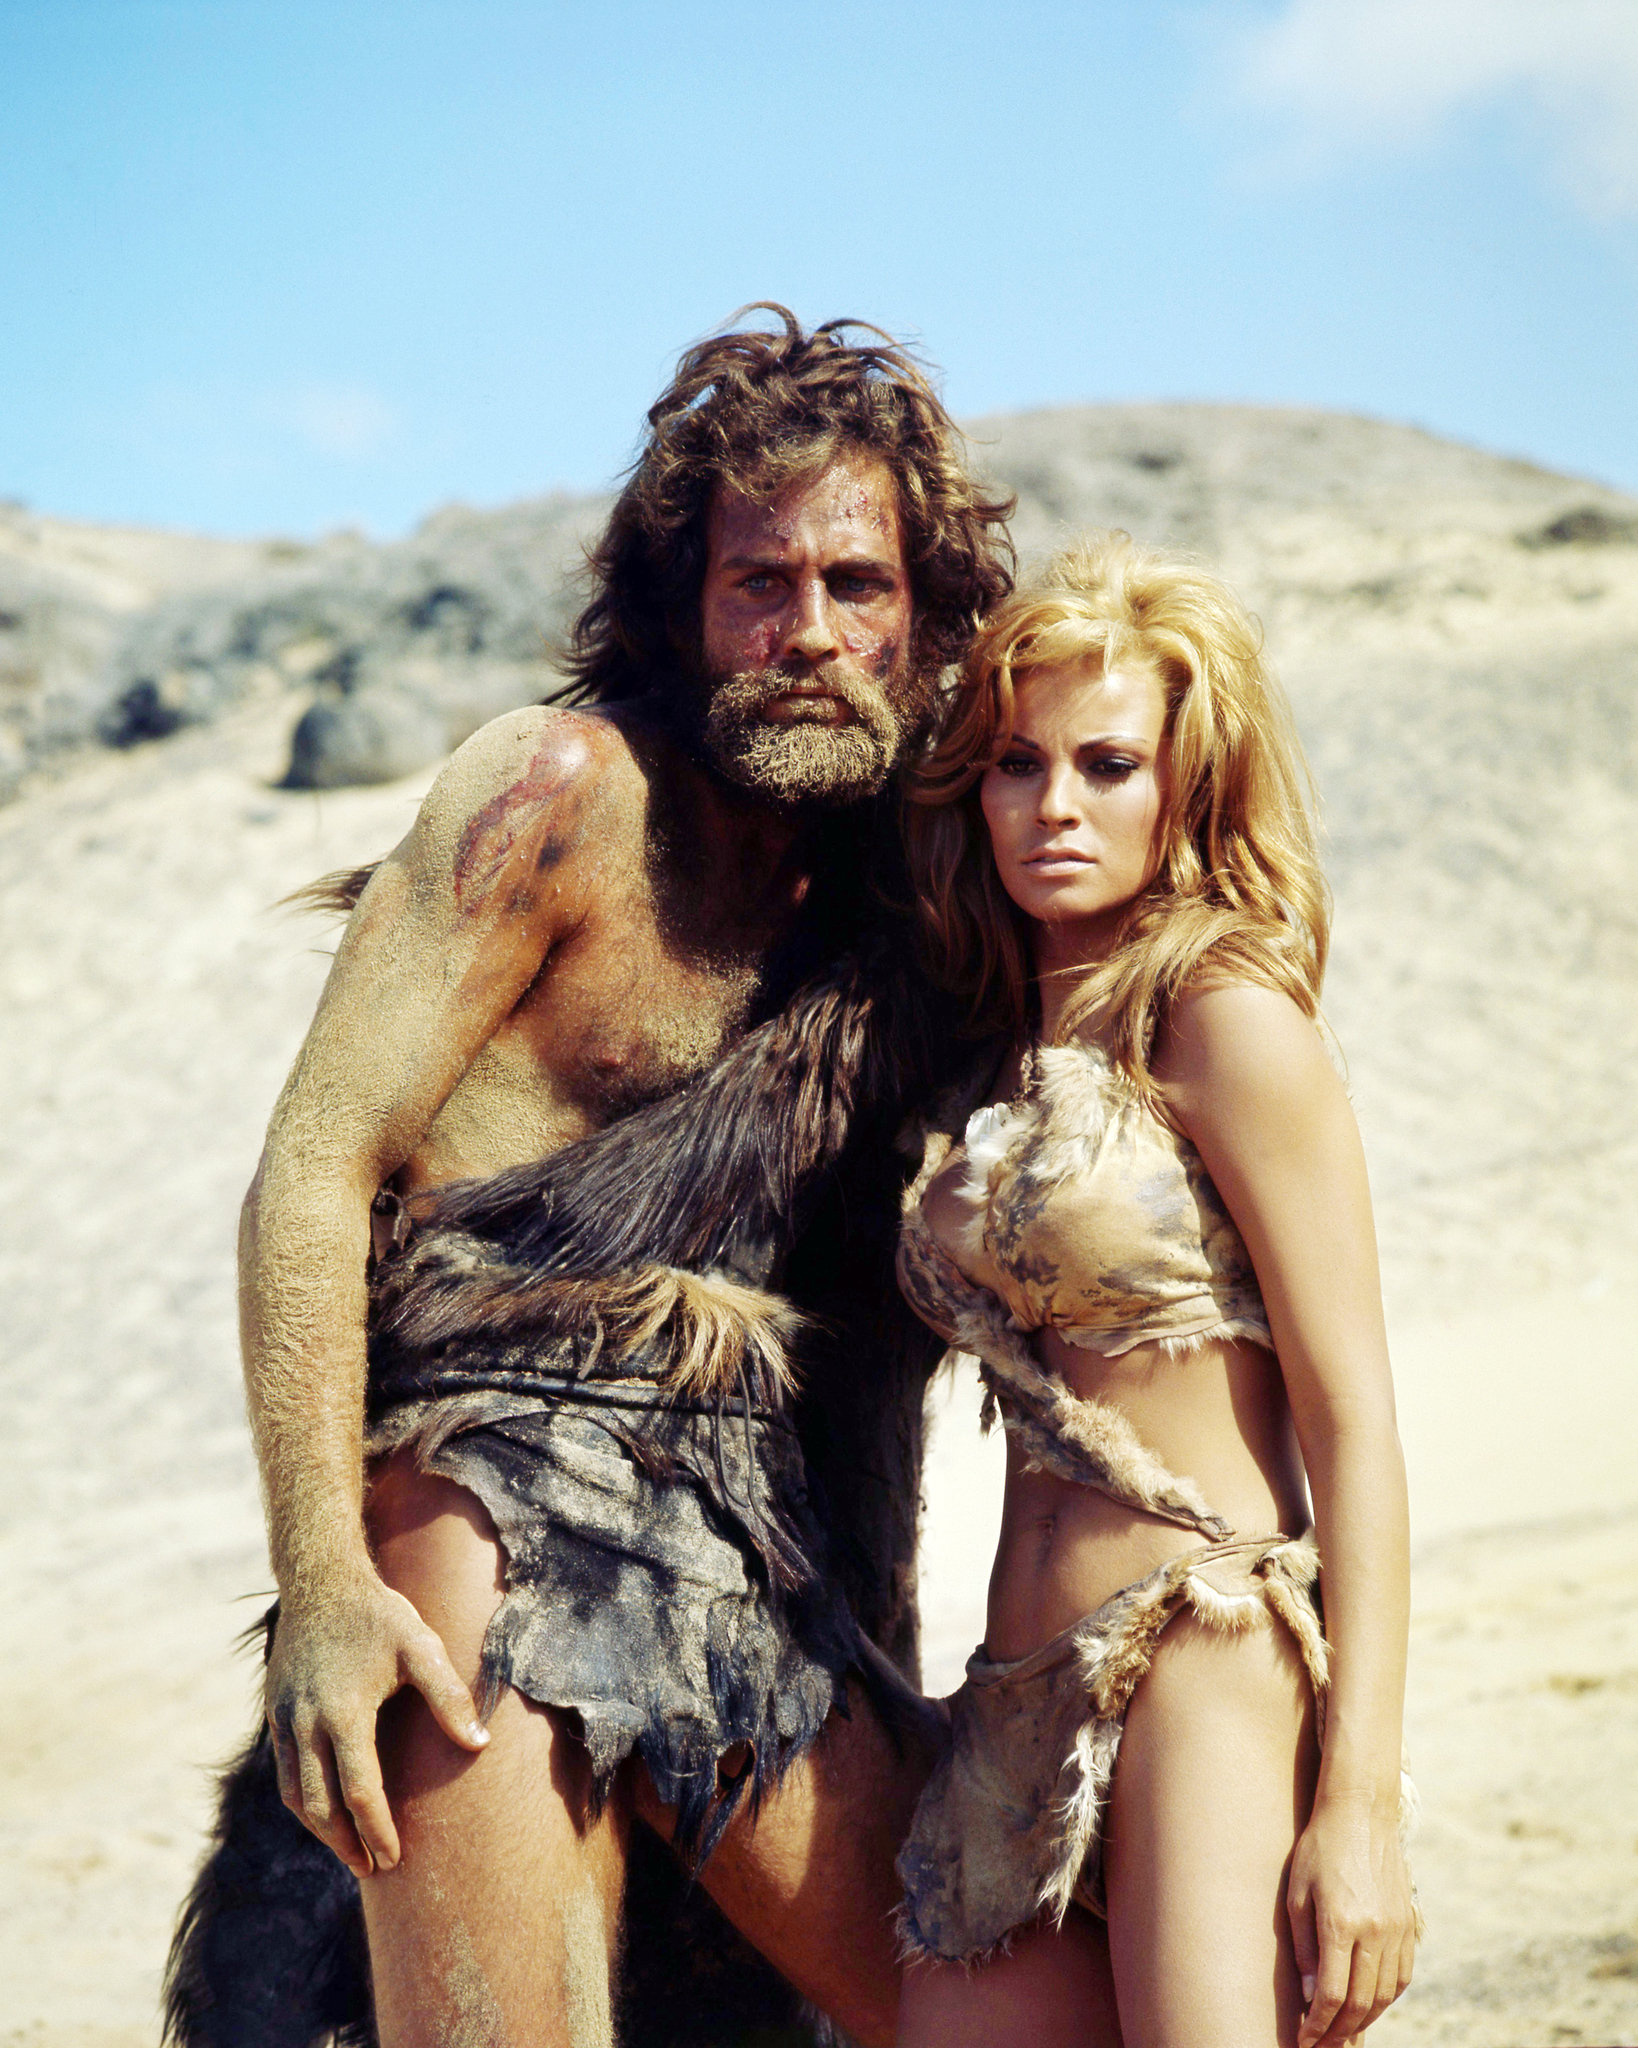 Raquel Welch and John Richardson in One Million Years B.C. (1966)